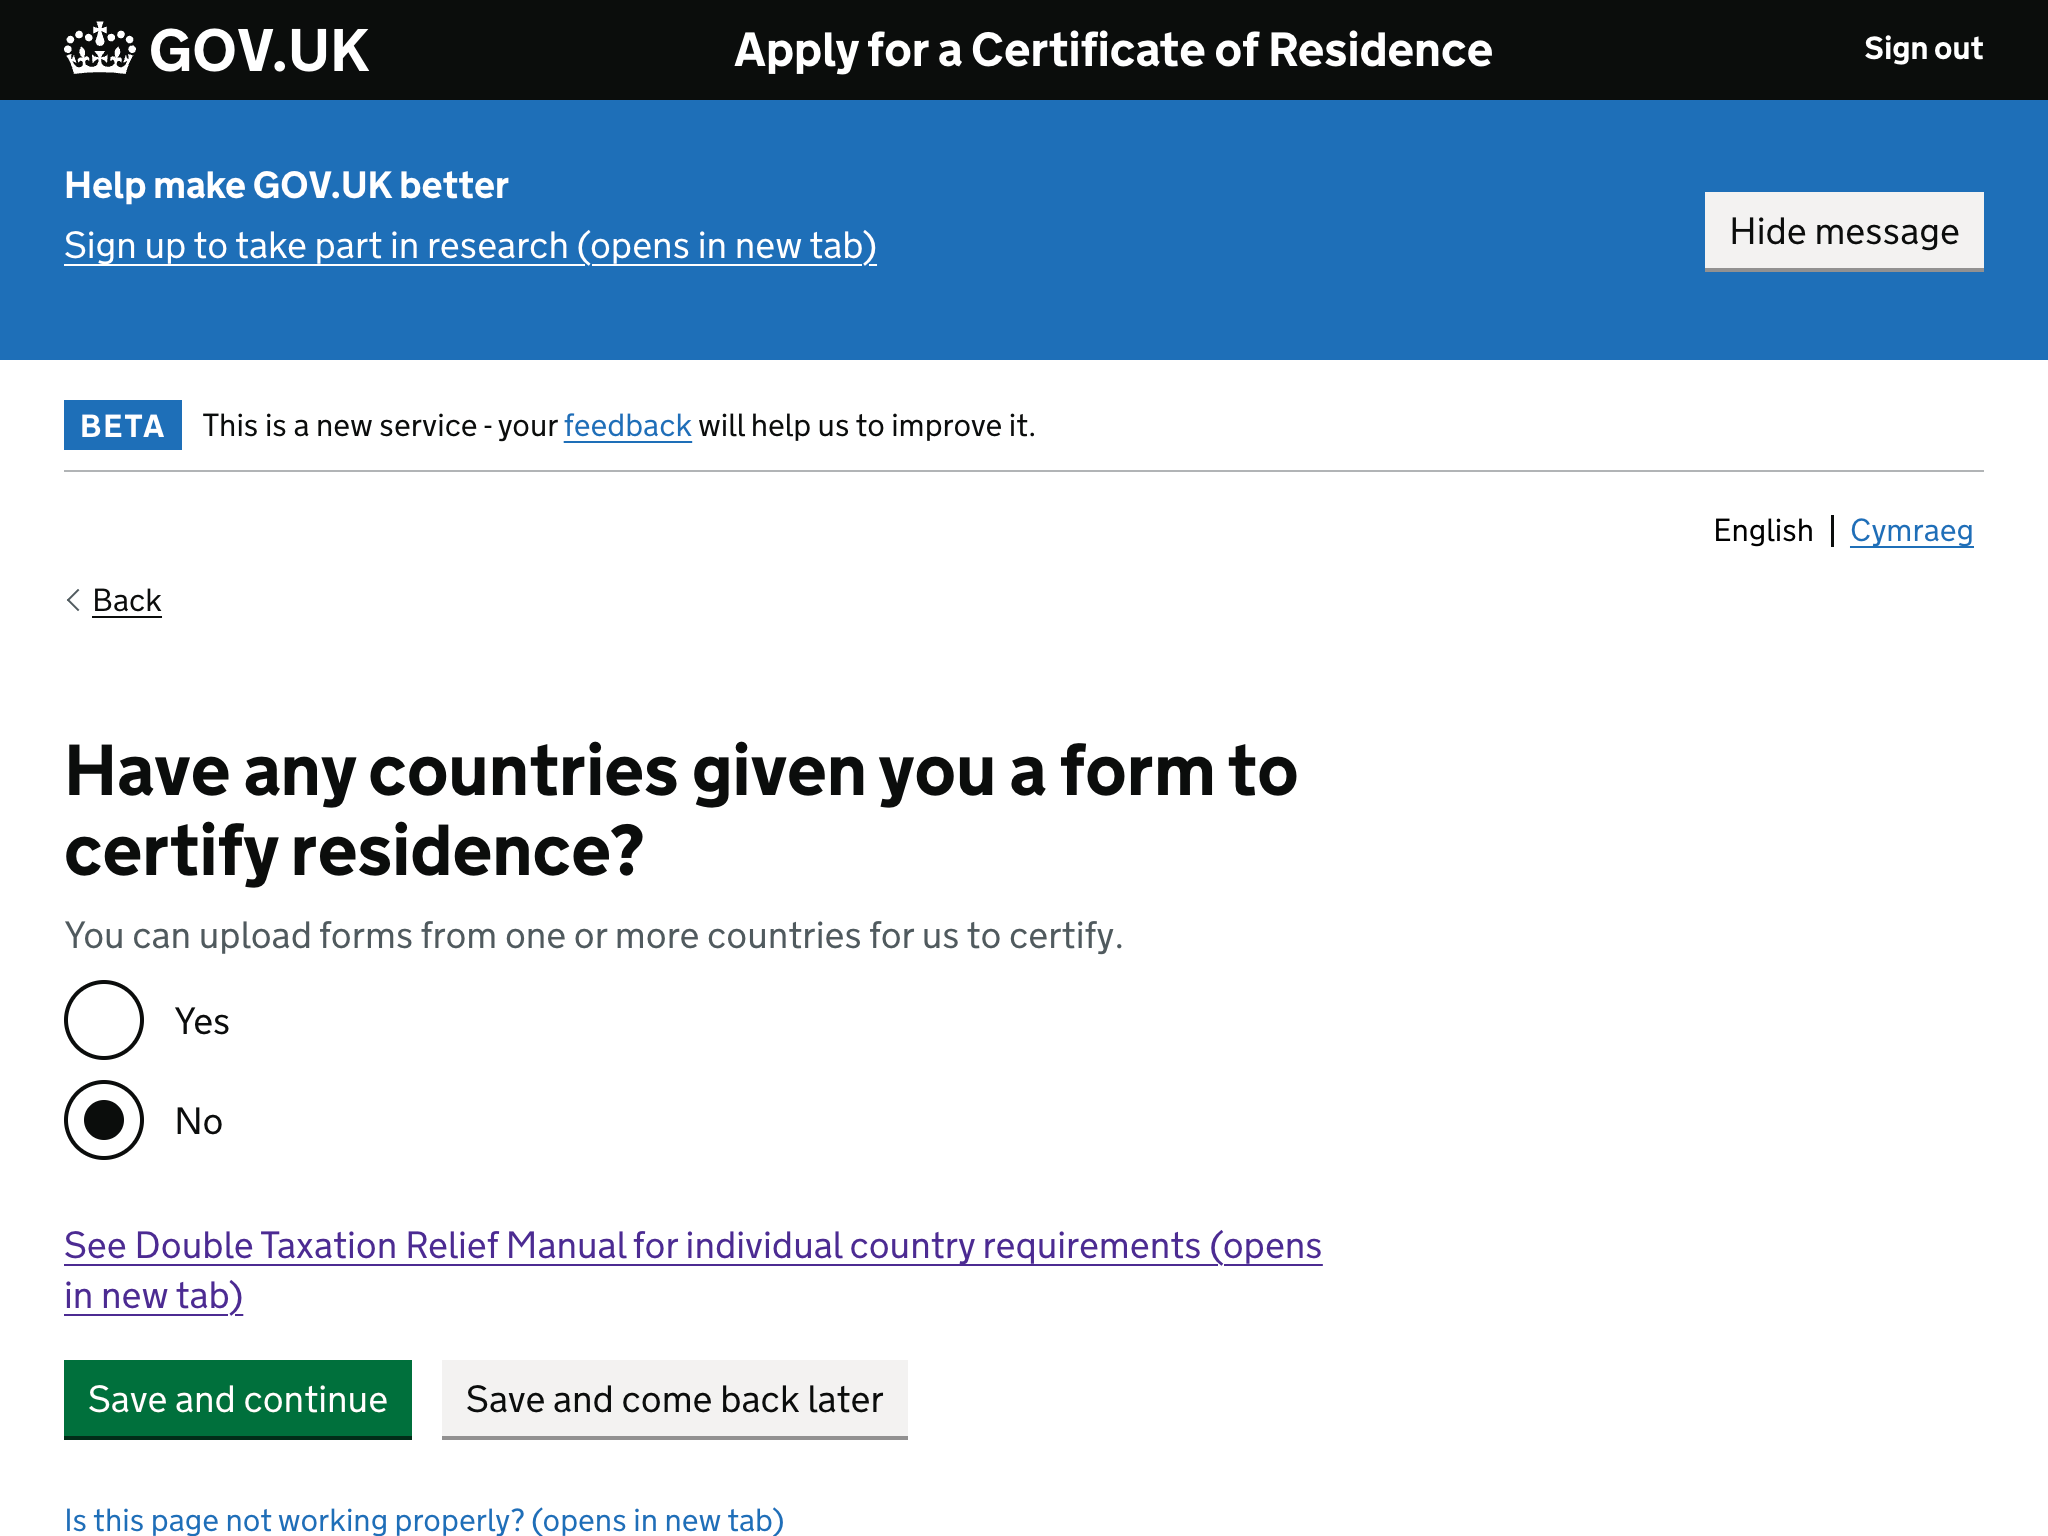 Have any countries given you a form to certify residence? 